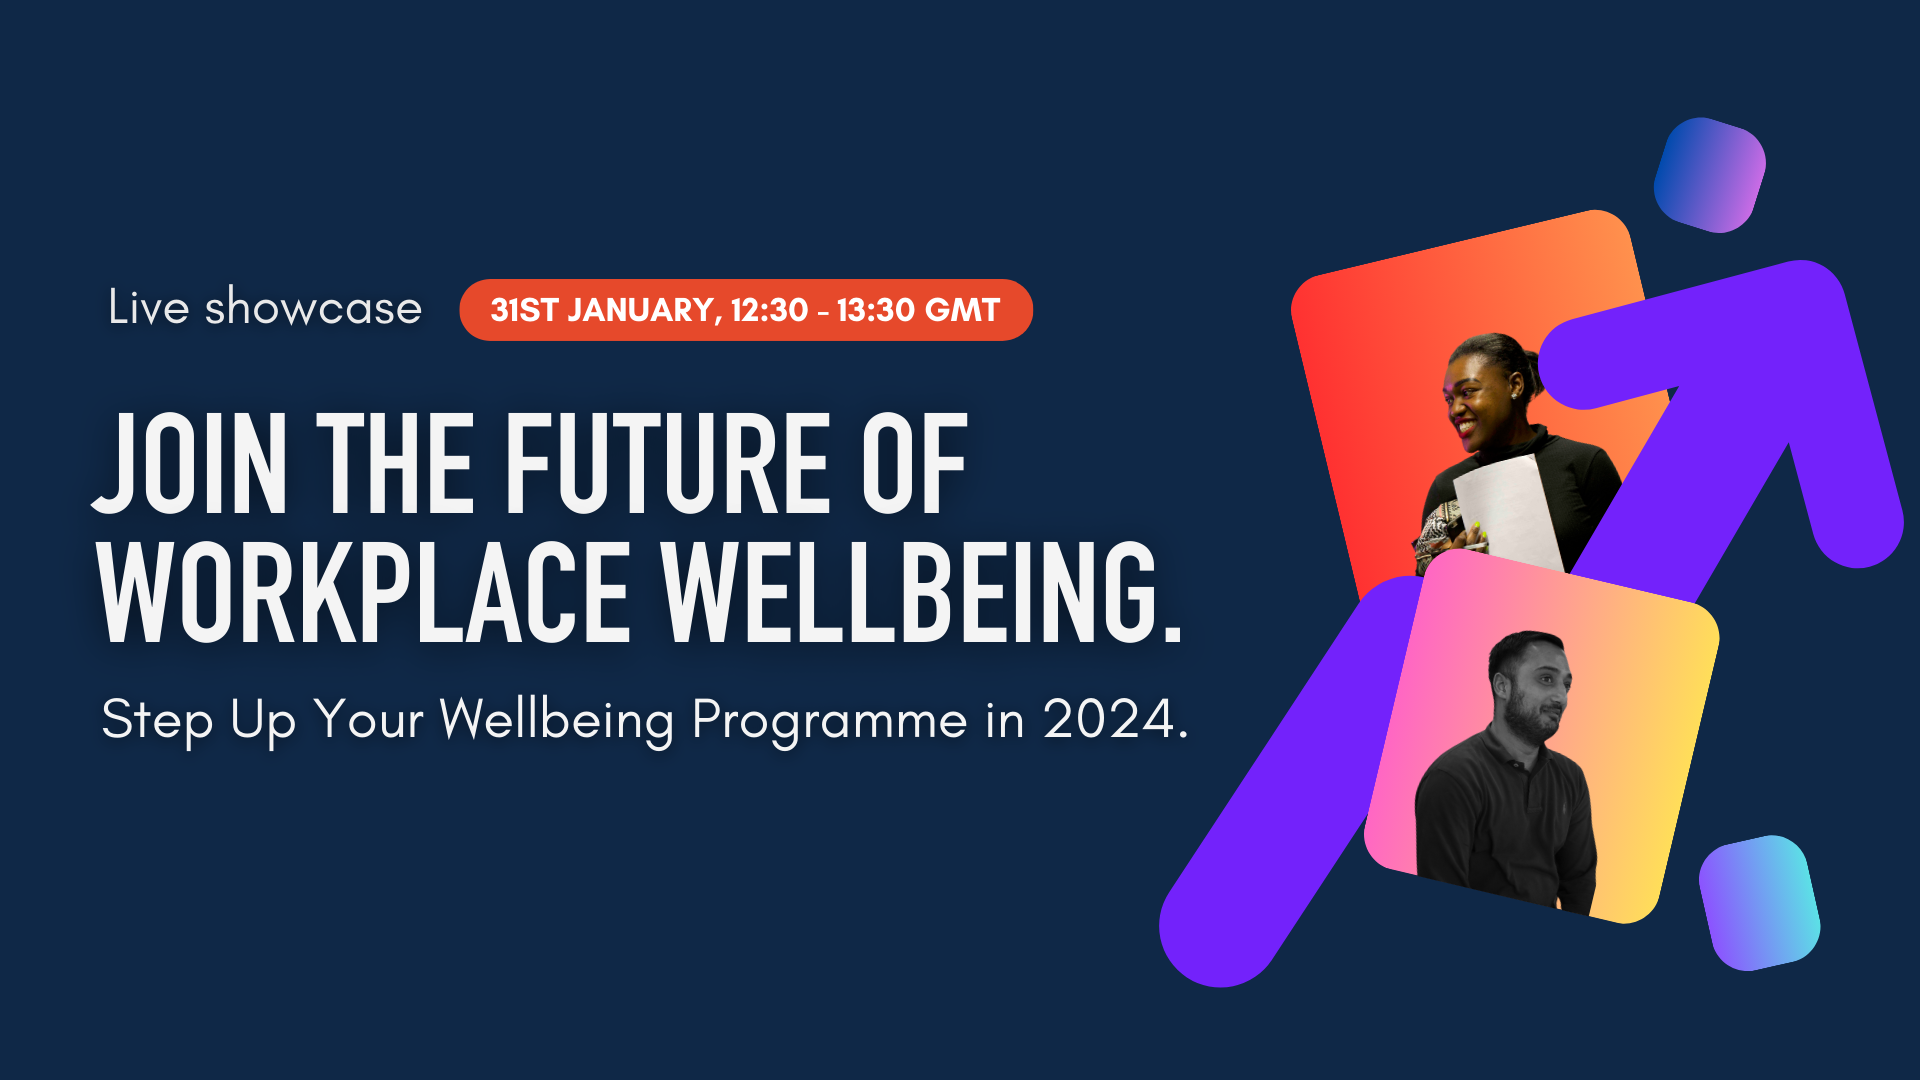 Step Up Your Wellbeing Programme in 2024